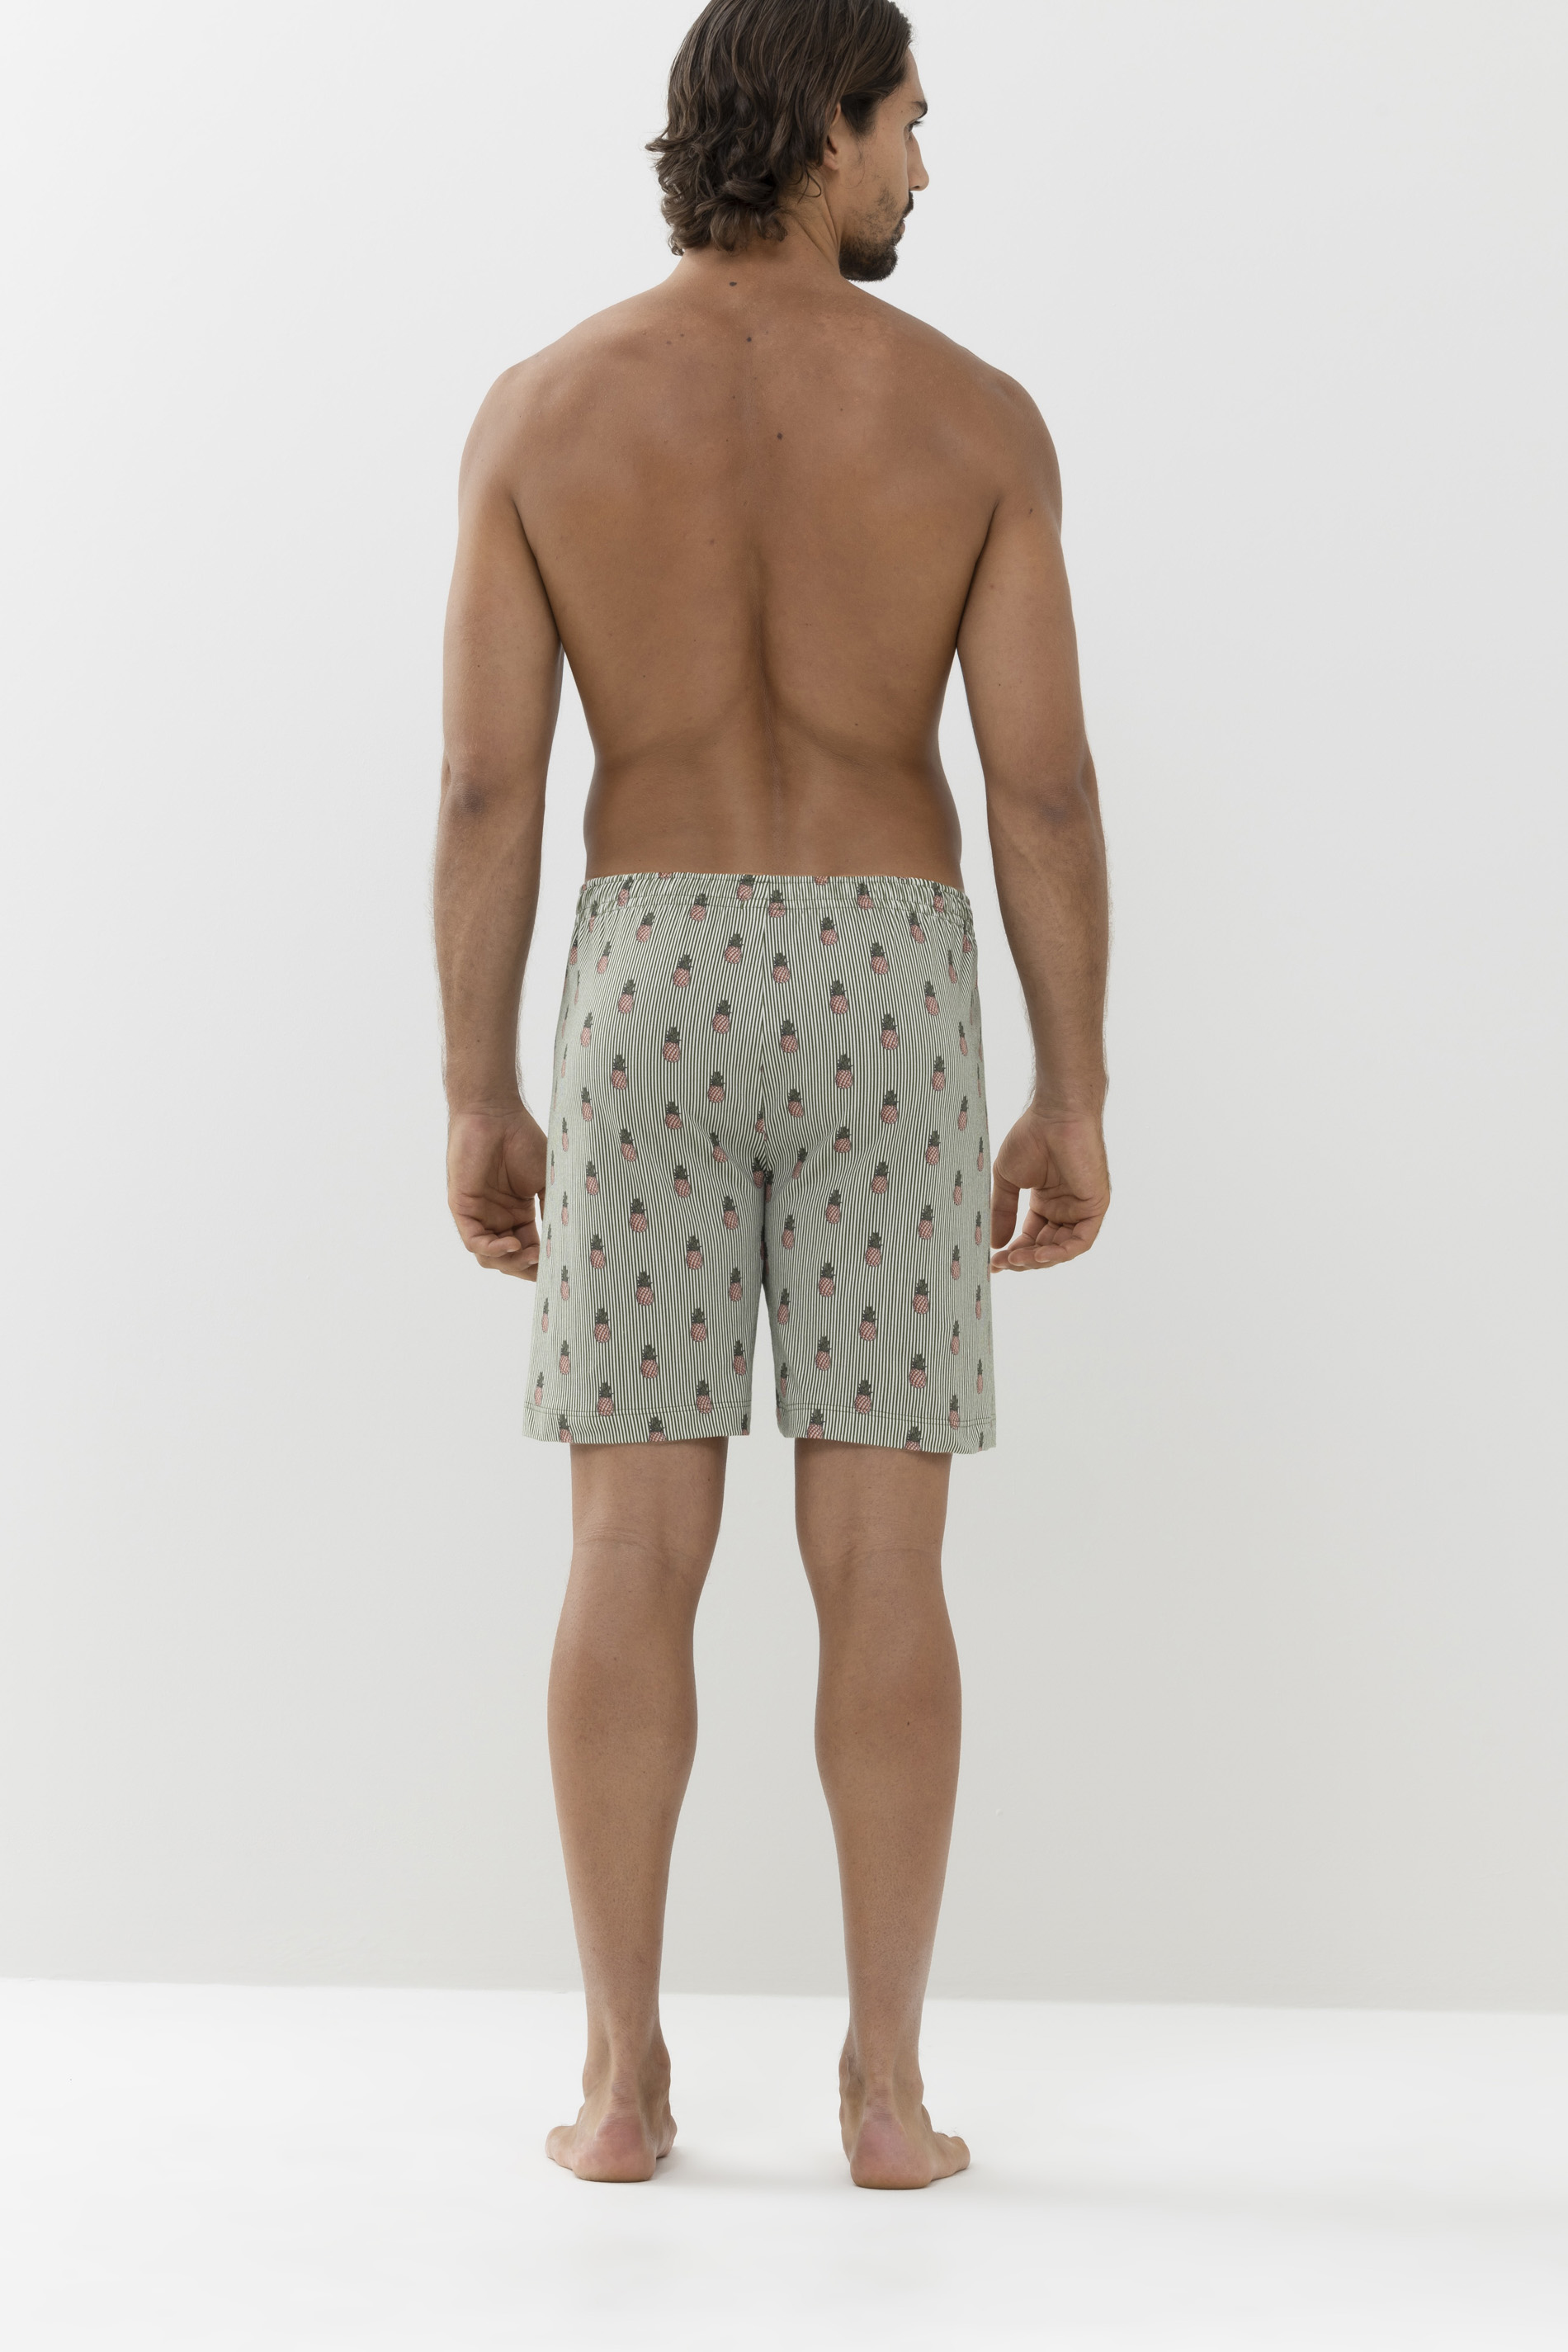 Shorts Serie Pineapple Rear View | mey®